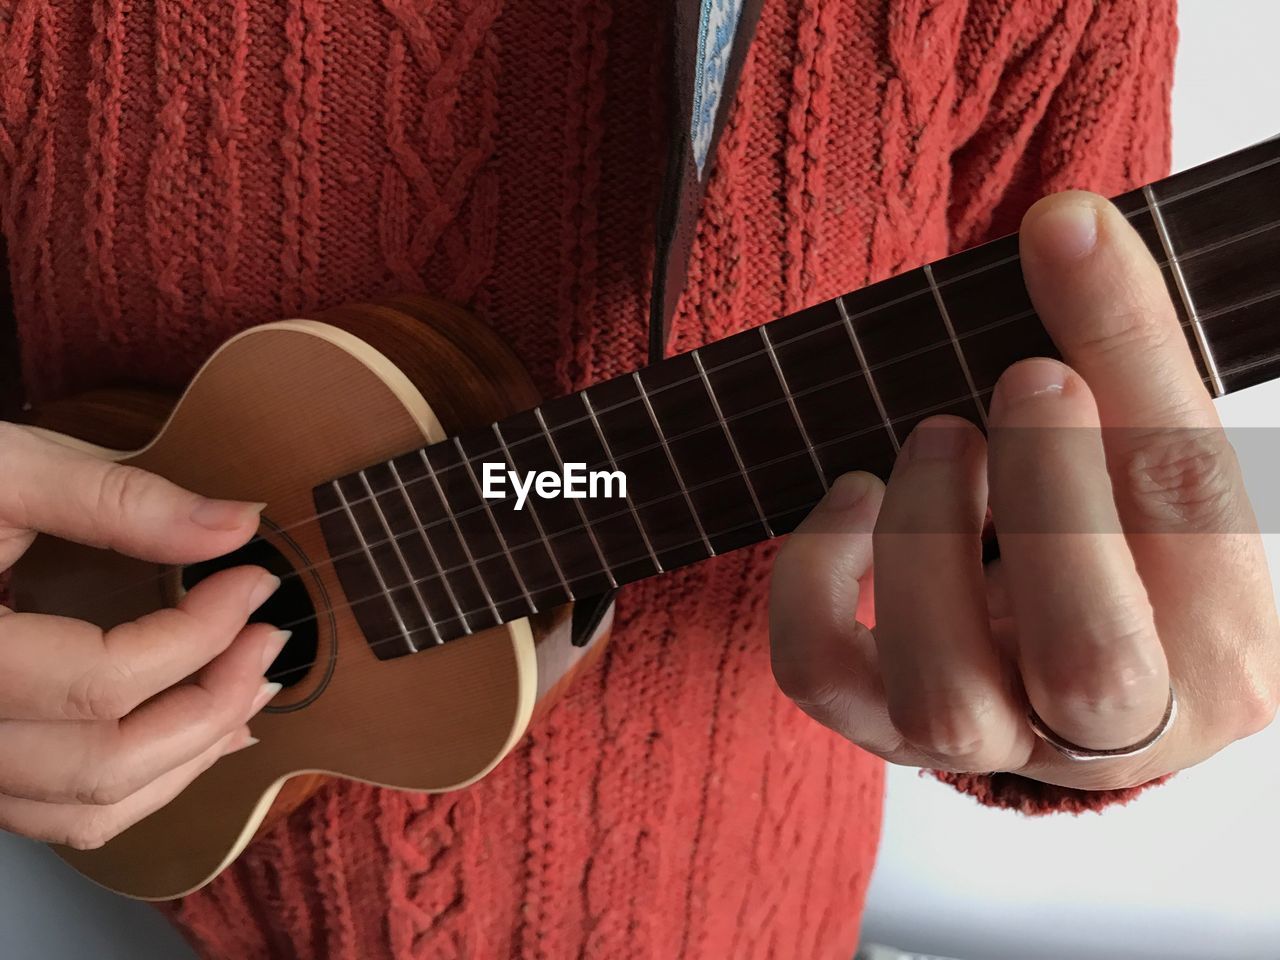 Midsection of woman playing ukelele